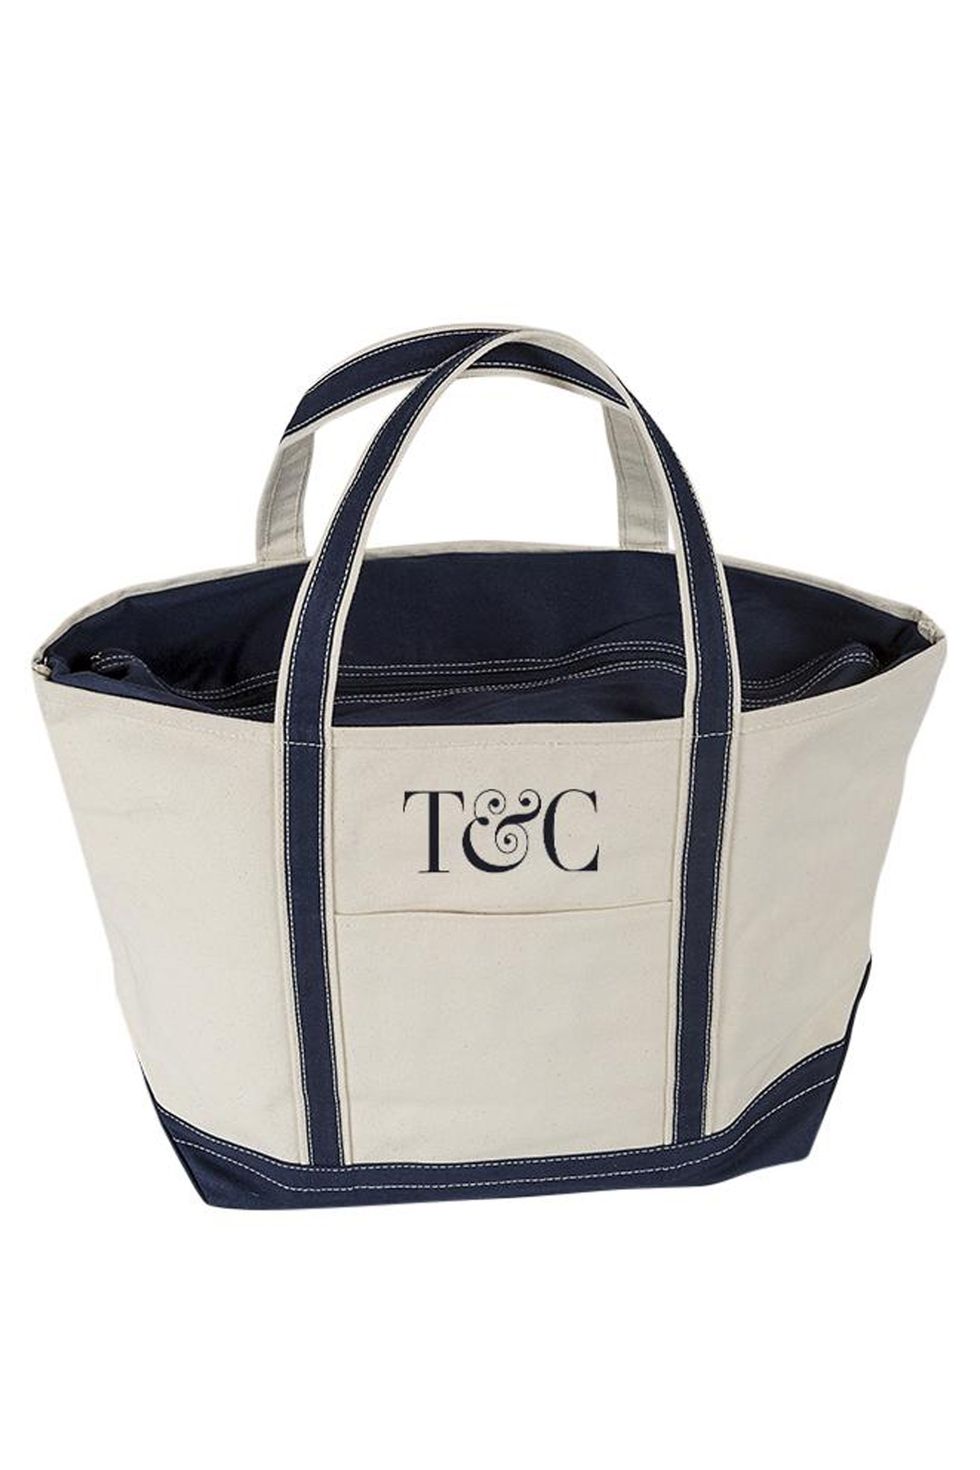 You Can Now Shop Your Very Own Town & Country Tote Bag